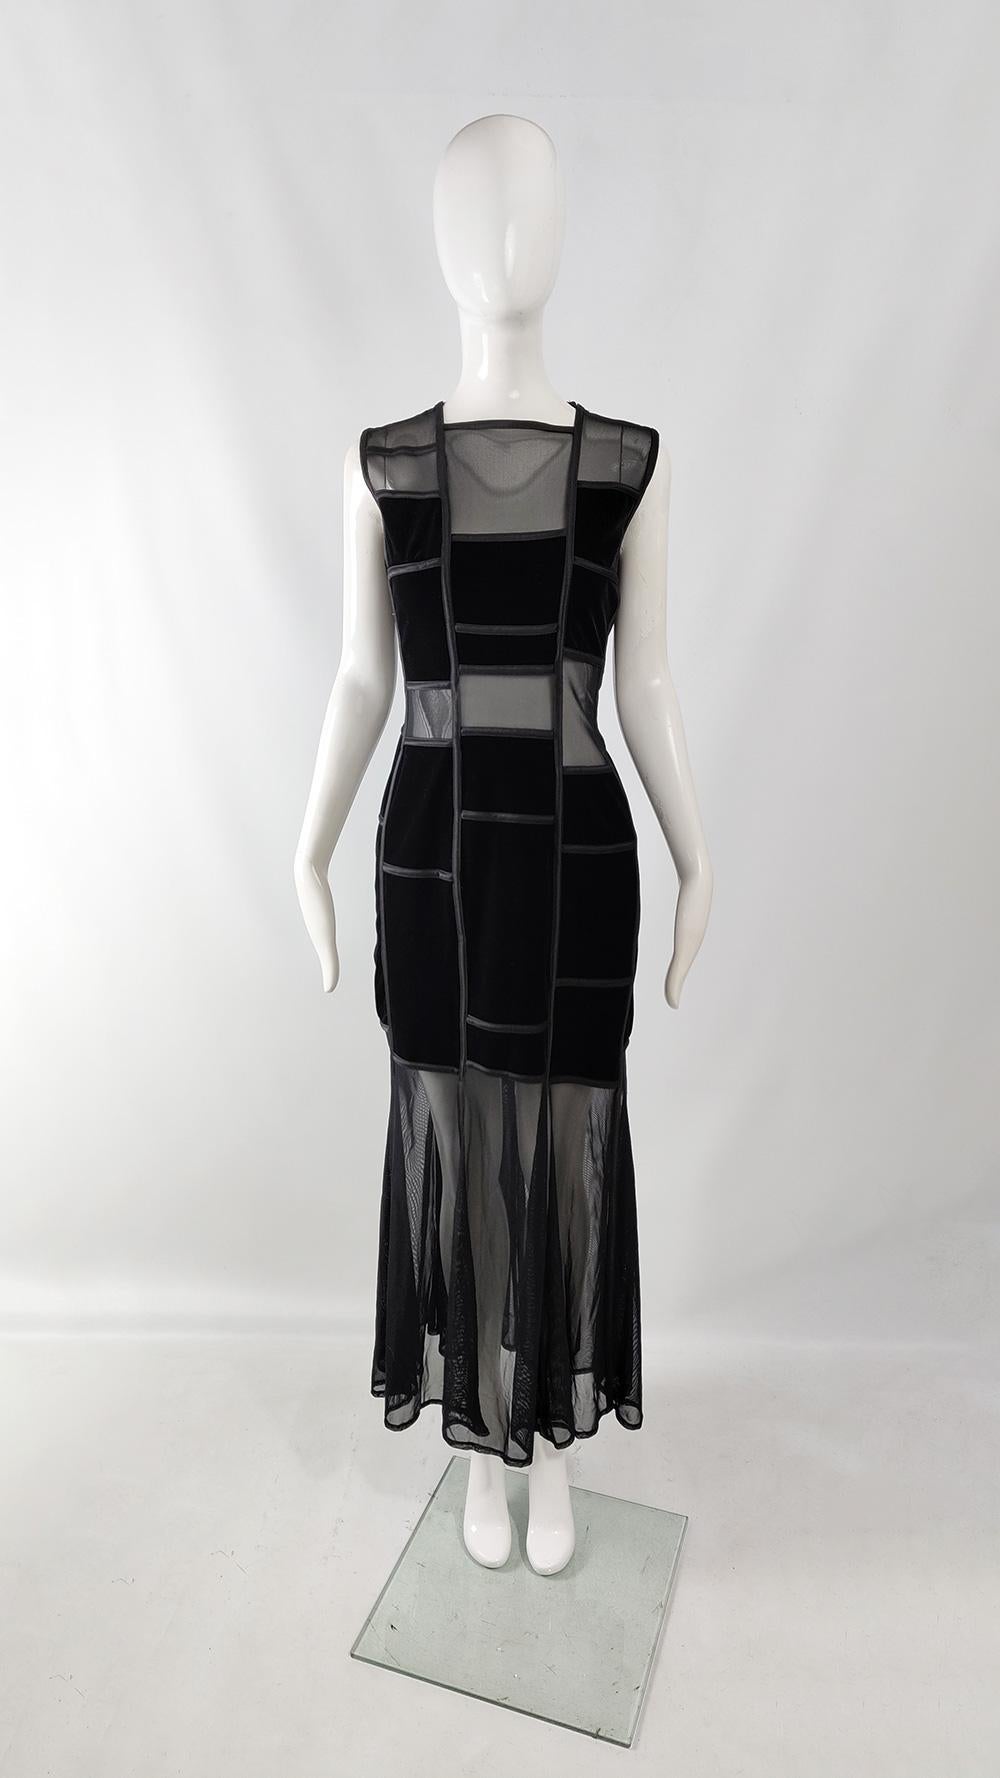 An incredibly sexy vintage womens evening dress from the 90s by luxury fashion designer, Tadashi Shoji. Made in the USA from a black velvet with a satin bias trim and is with sheer mesh cut out panels for a scandalous, yet minimalist look. It has an